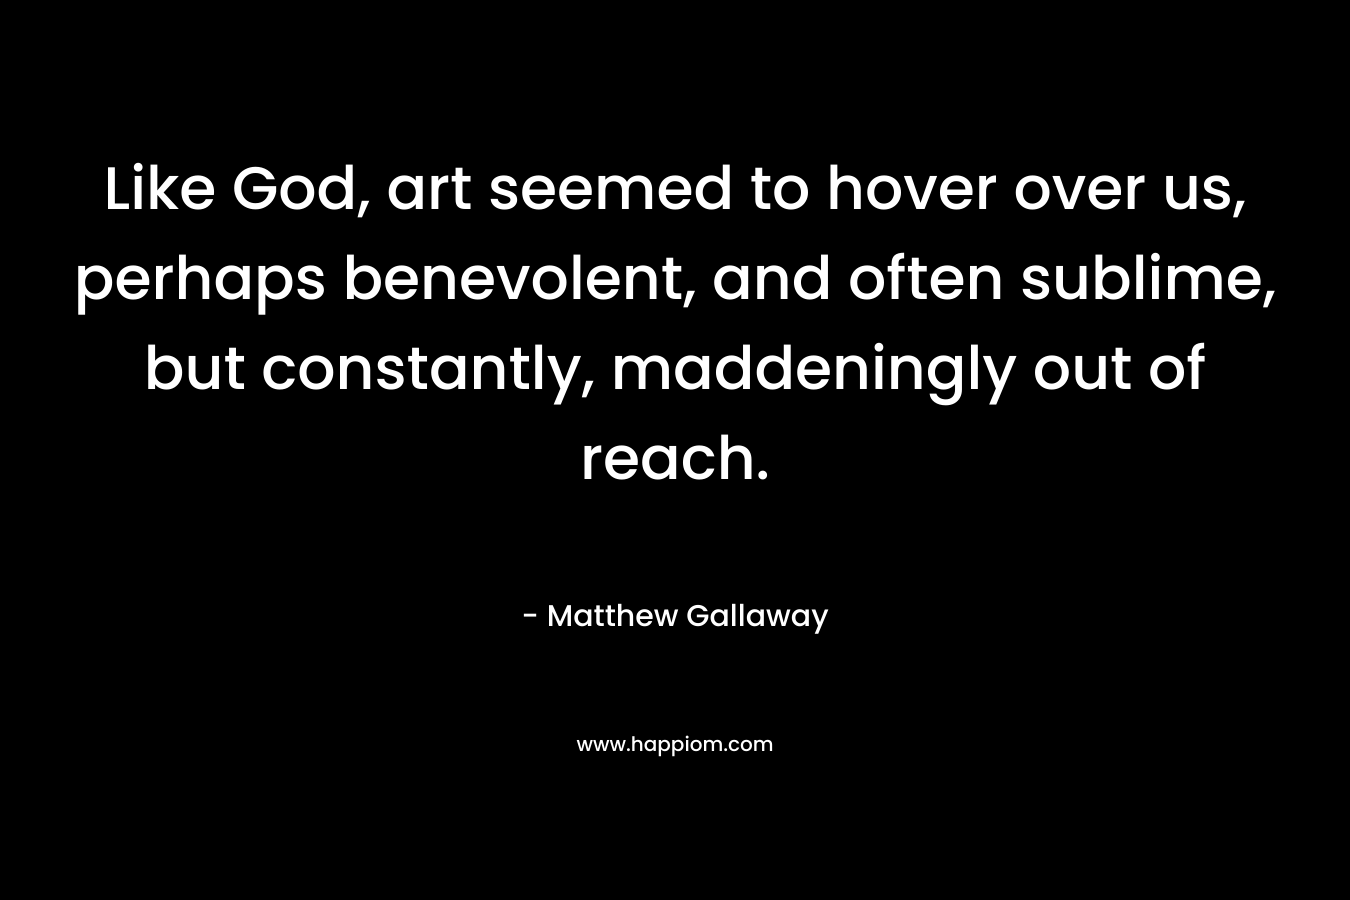 Like God, art seemed to hover over us, perhaps benevolent, and often sublime, but constantly, maddeningly out of reach.